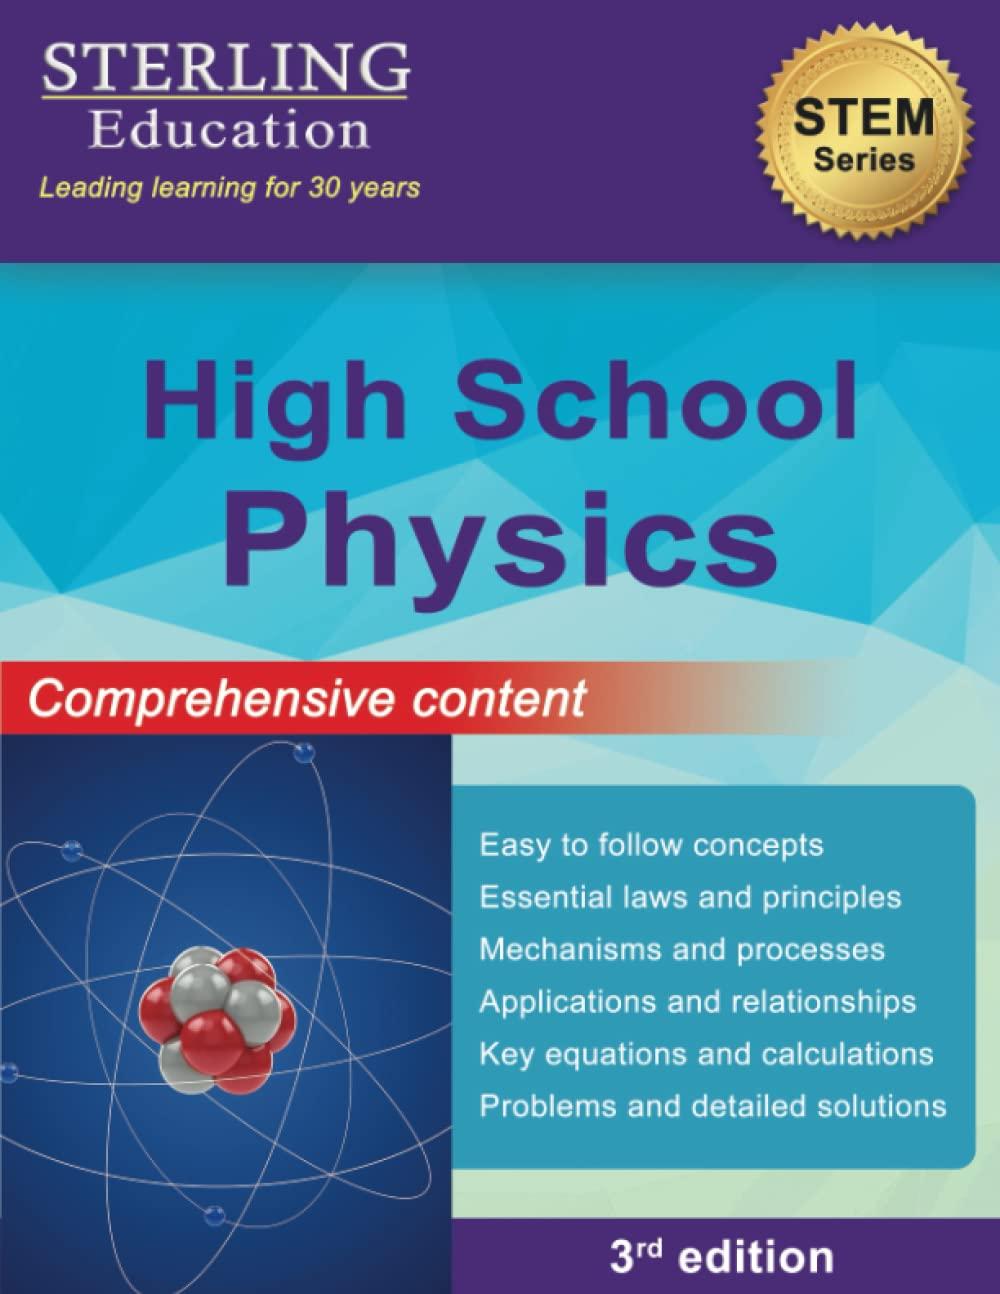 high school physics comprehensive content 3rd edition sterling education b0btksp6lw, 979-8885571234